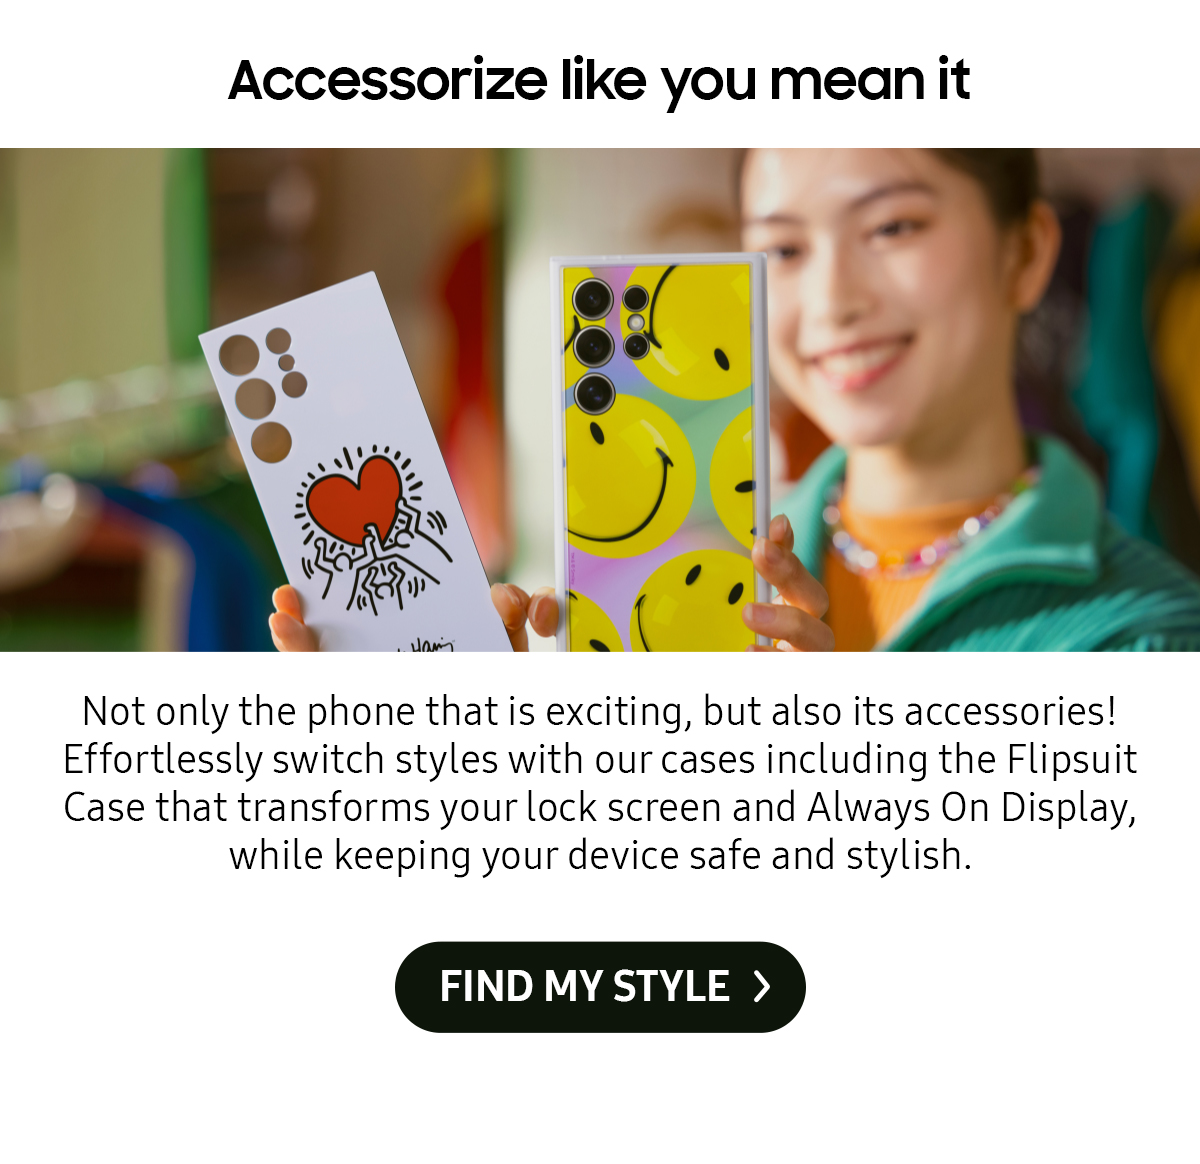 Accessorize like you mean it | Not only the phone that is exciting, but also its accessories! Effortlessly switch styles with our cases including the Flipsuit Case that transforms your lock screen and Always On Display, while keeping your device safe and stylish.